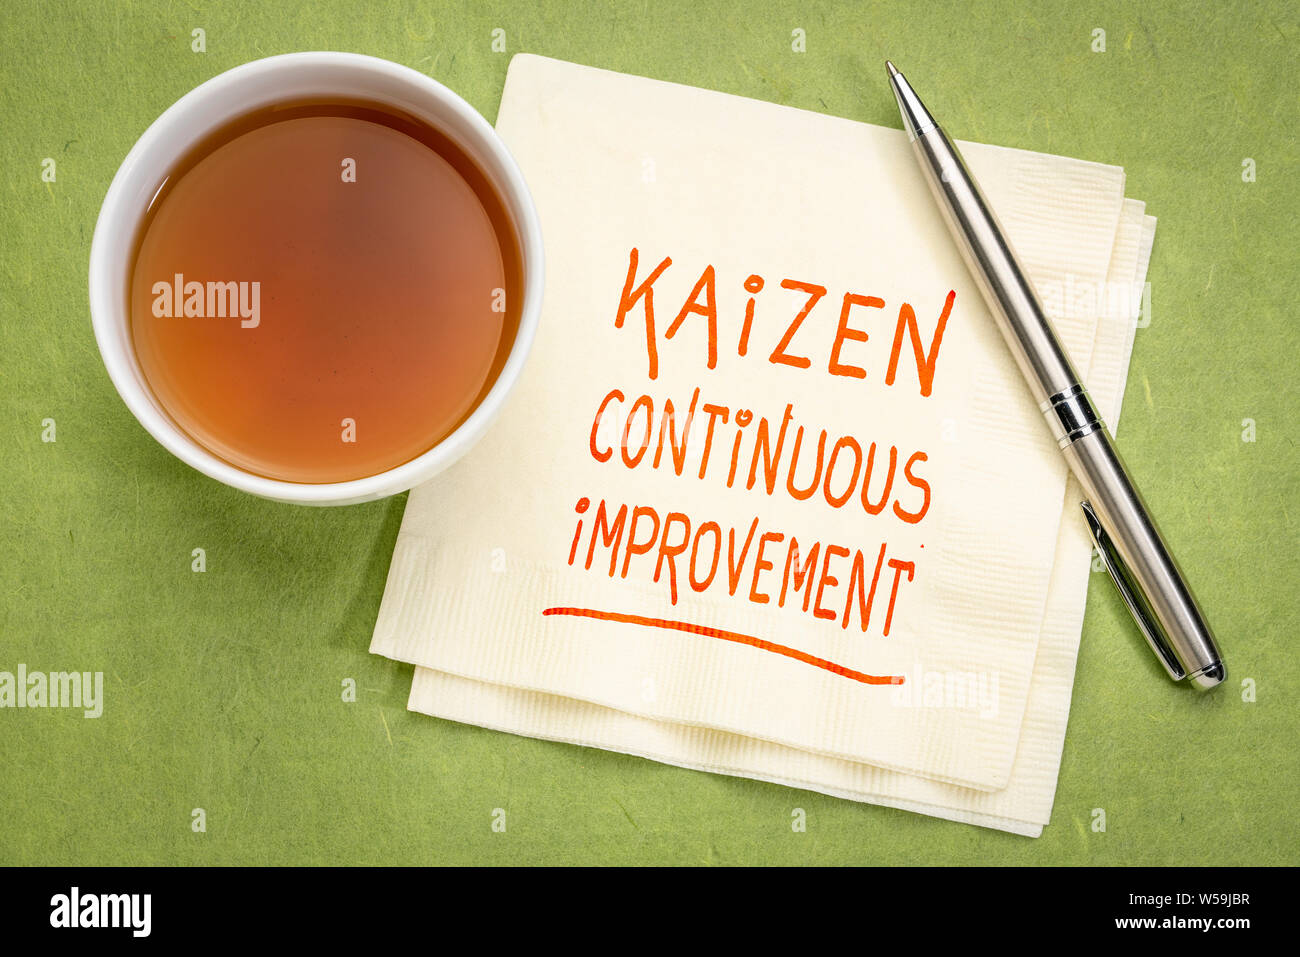 Kaizen - Japanese continuous improvement concept - handwriting  on a napkin with a cup of tea Stock Photo